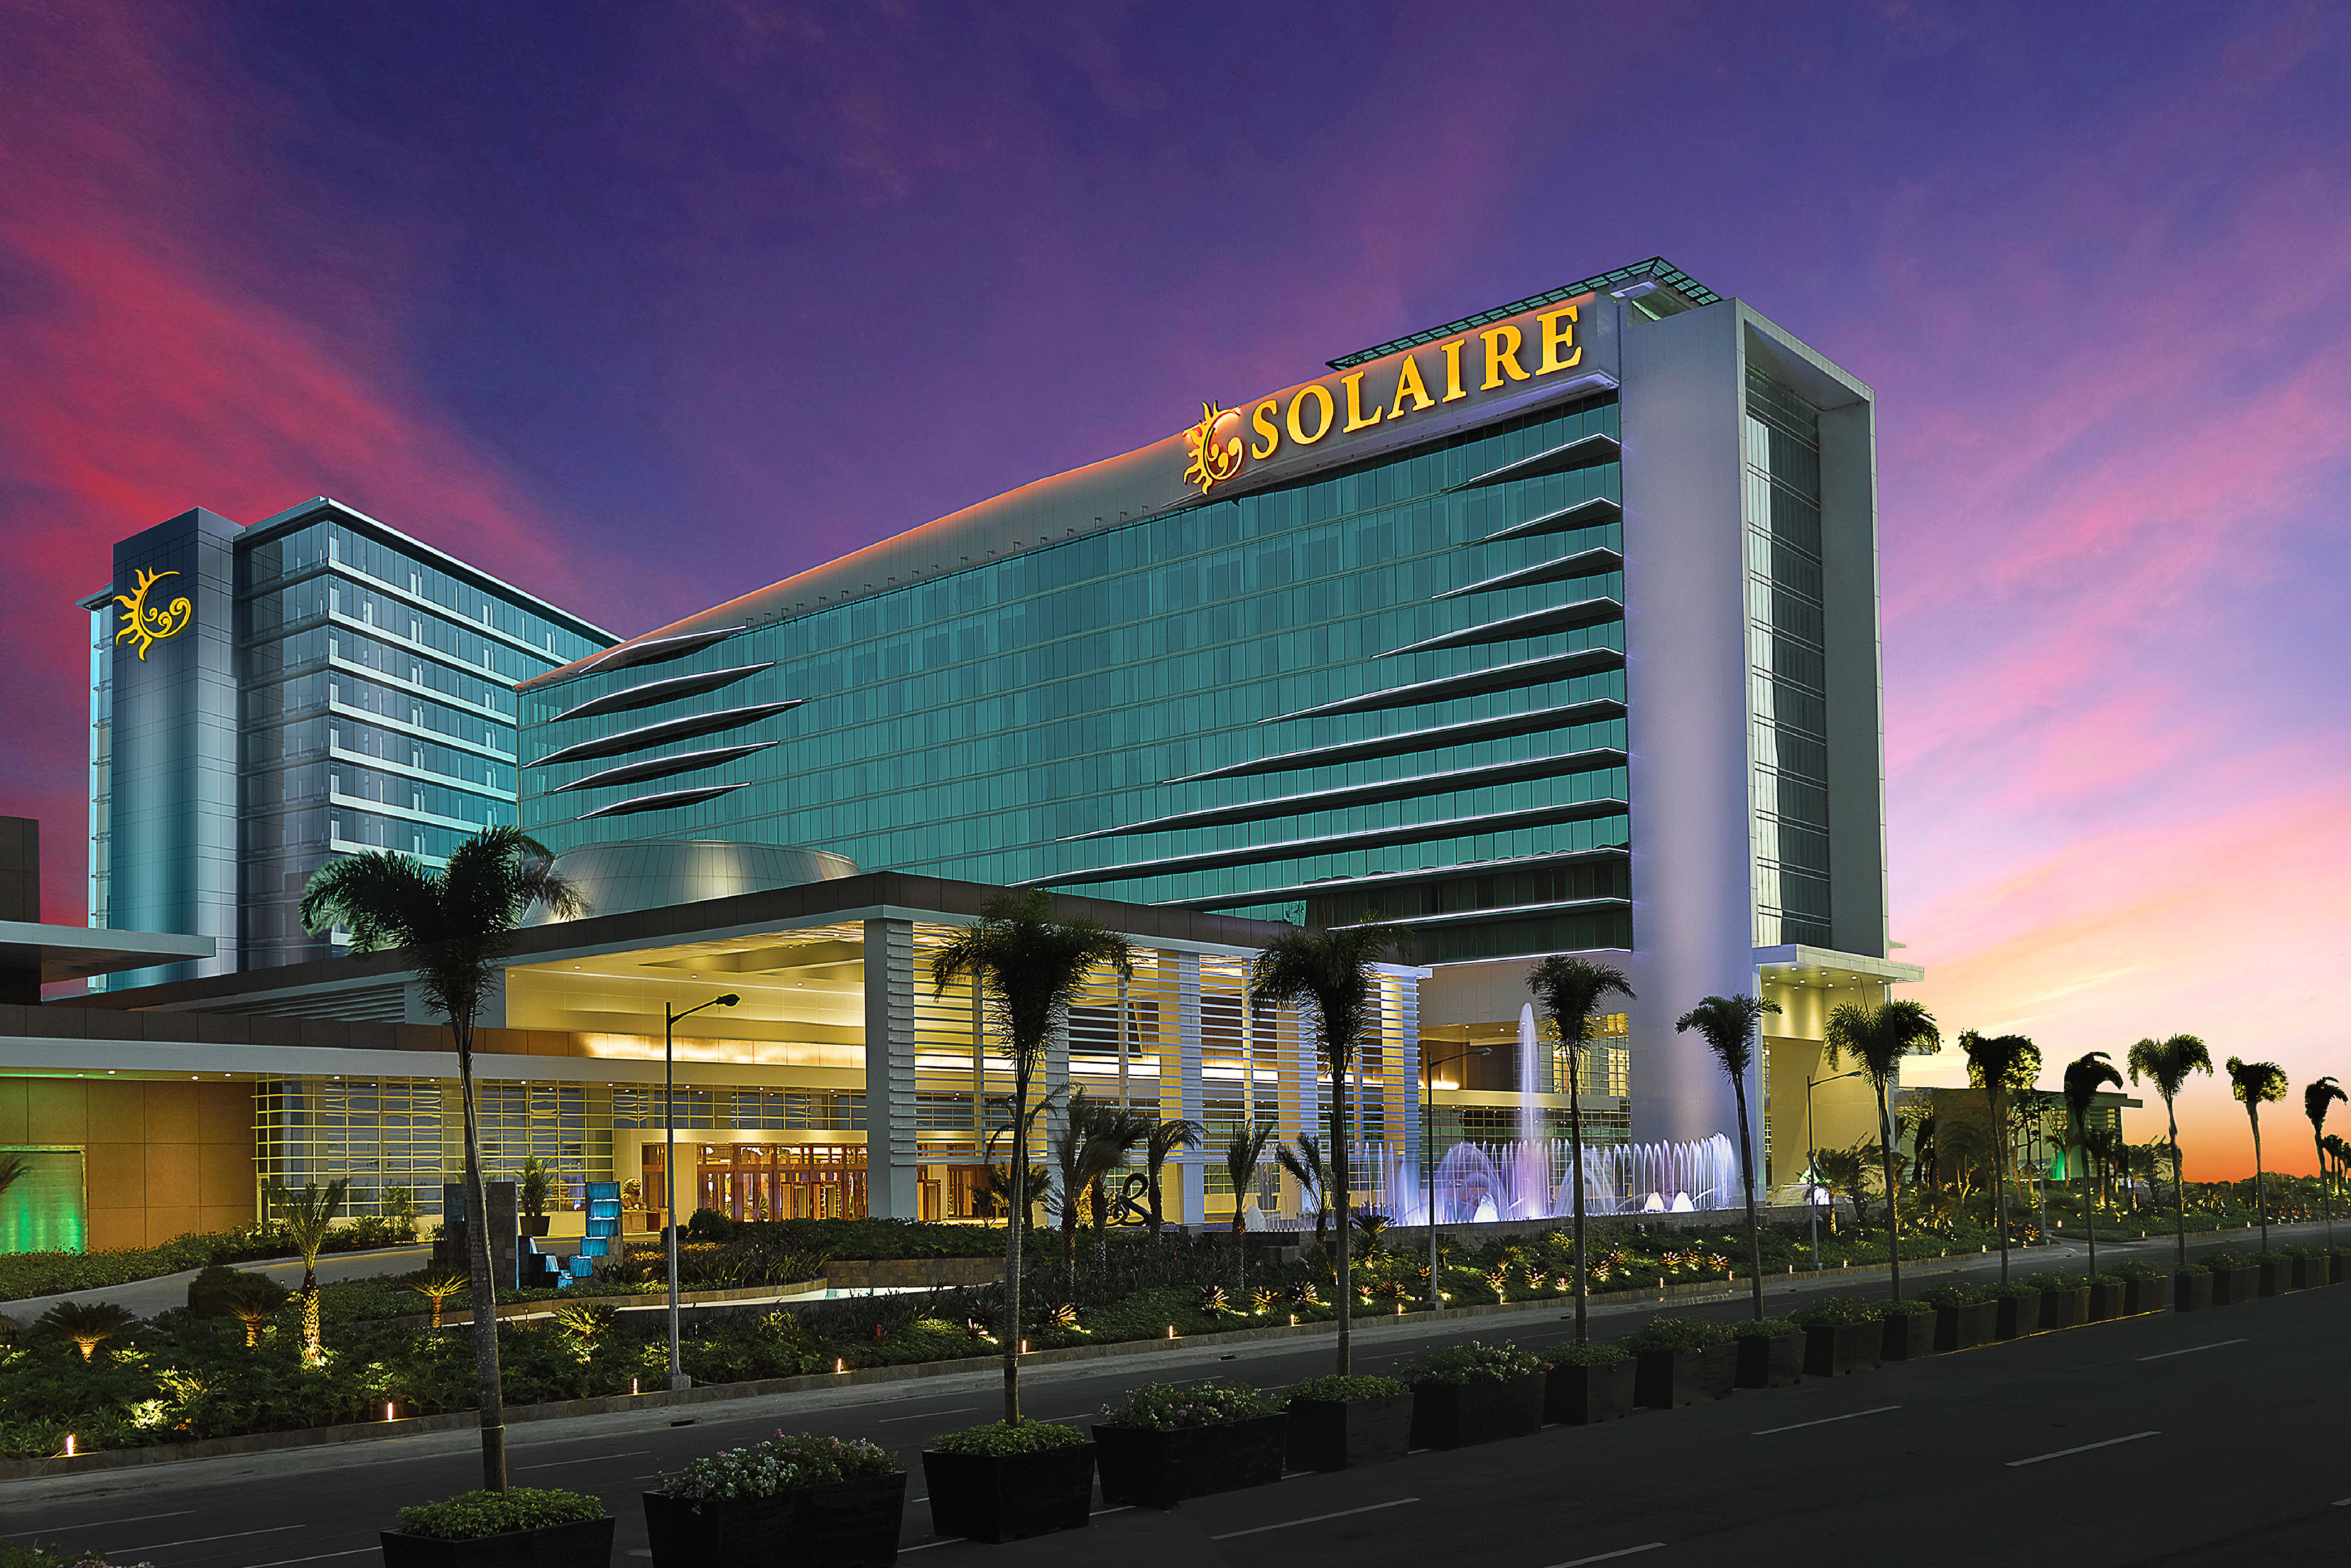 Solaire resort and casino